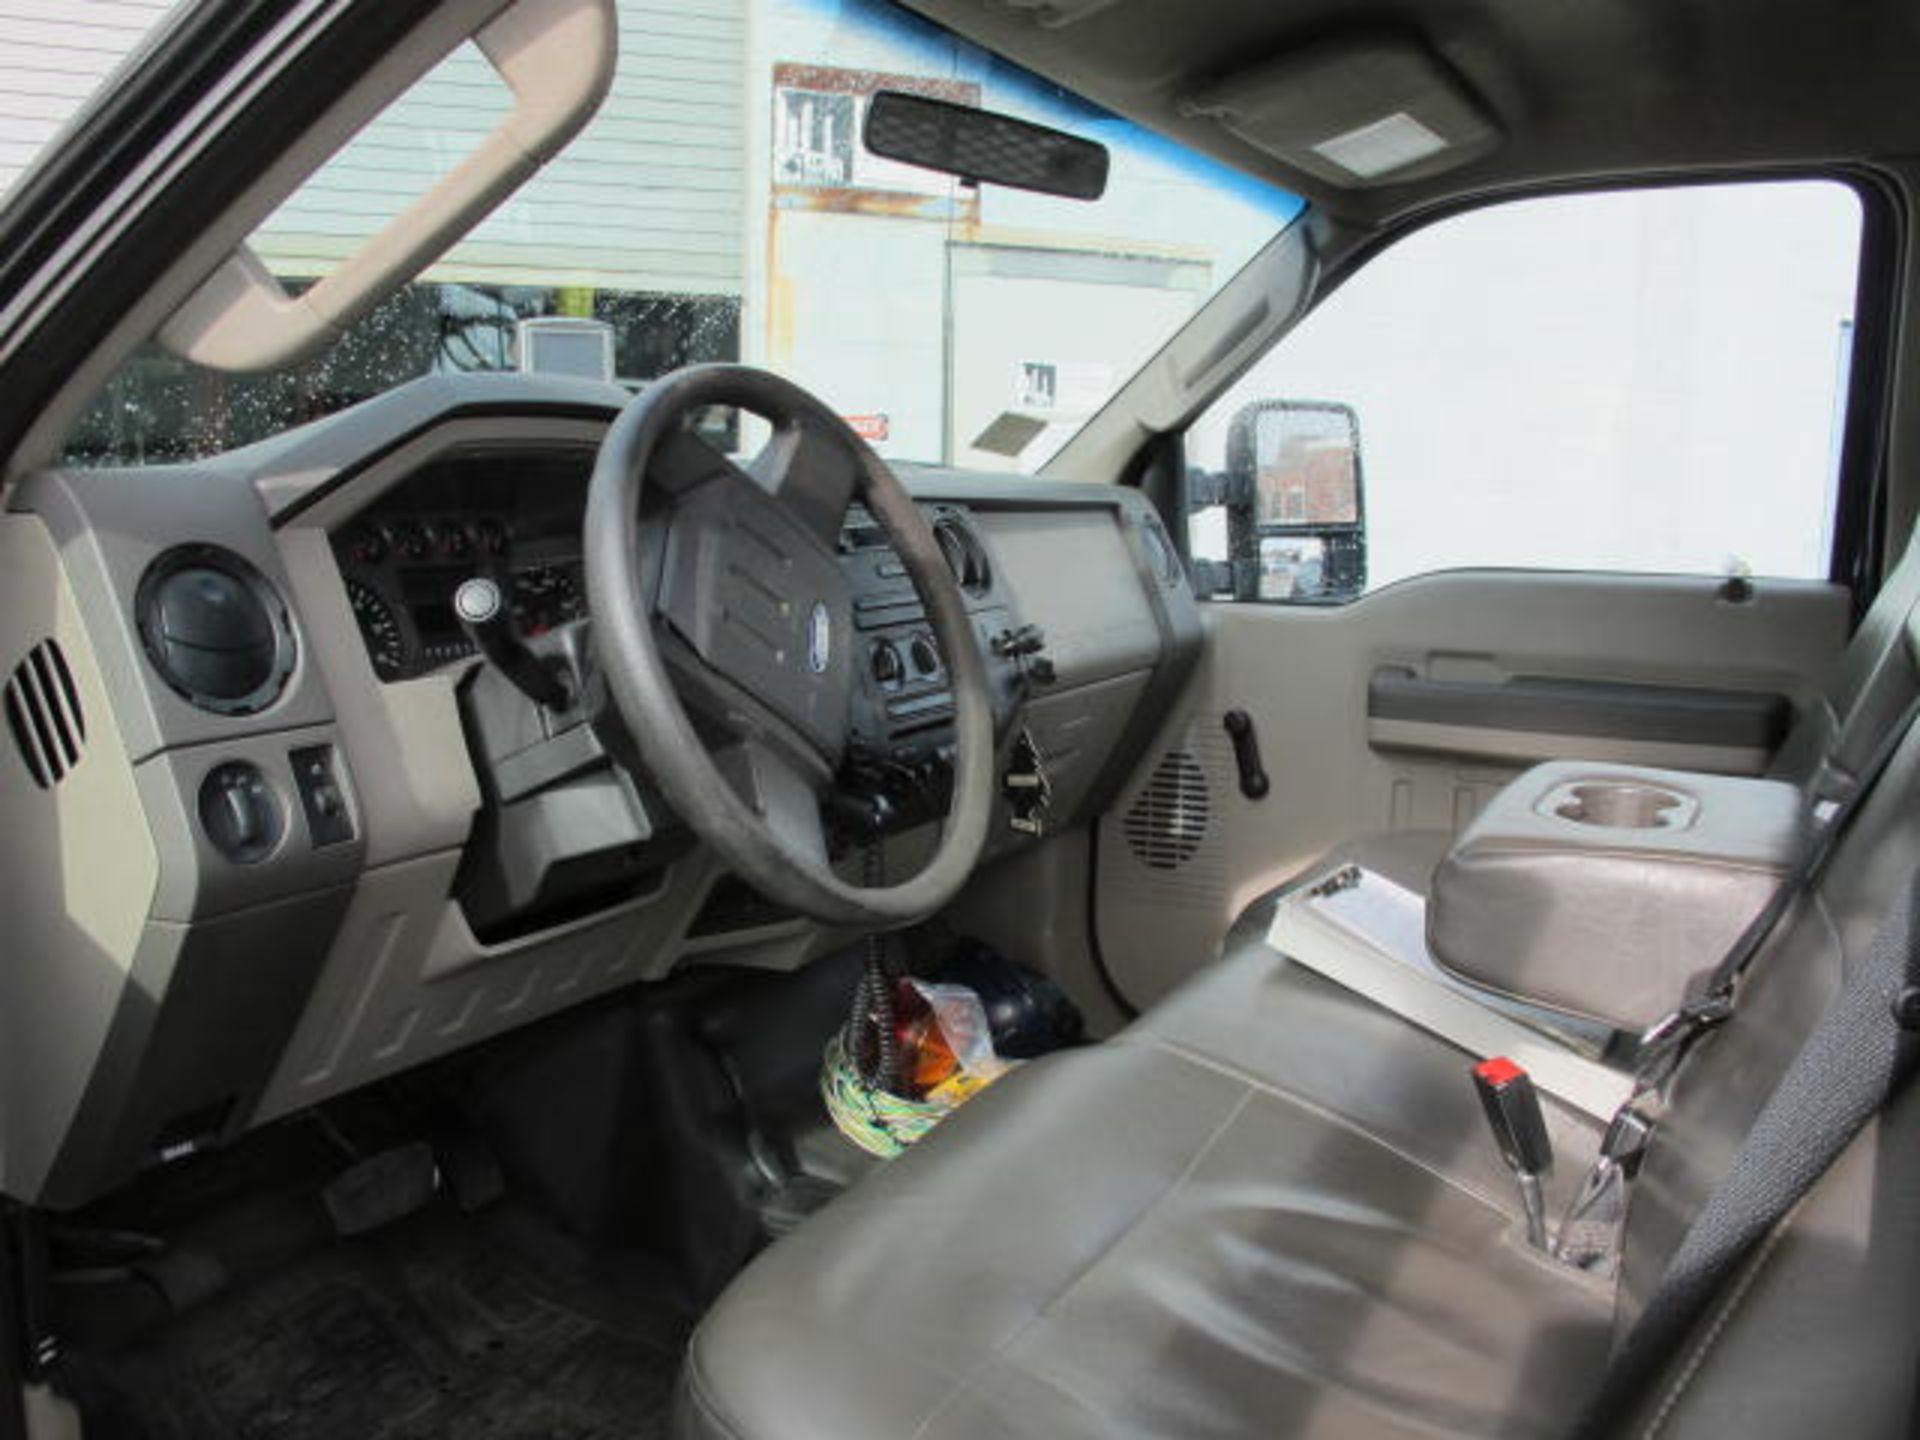 2010 Ford F350 Super Duty Pickup Truck, VIN: 1FTWF3B56AEB43638, 111,524 Miles, 4WD, 5.6 Liter Gas - Image 4 of 7